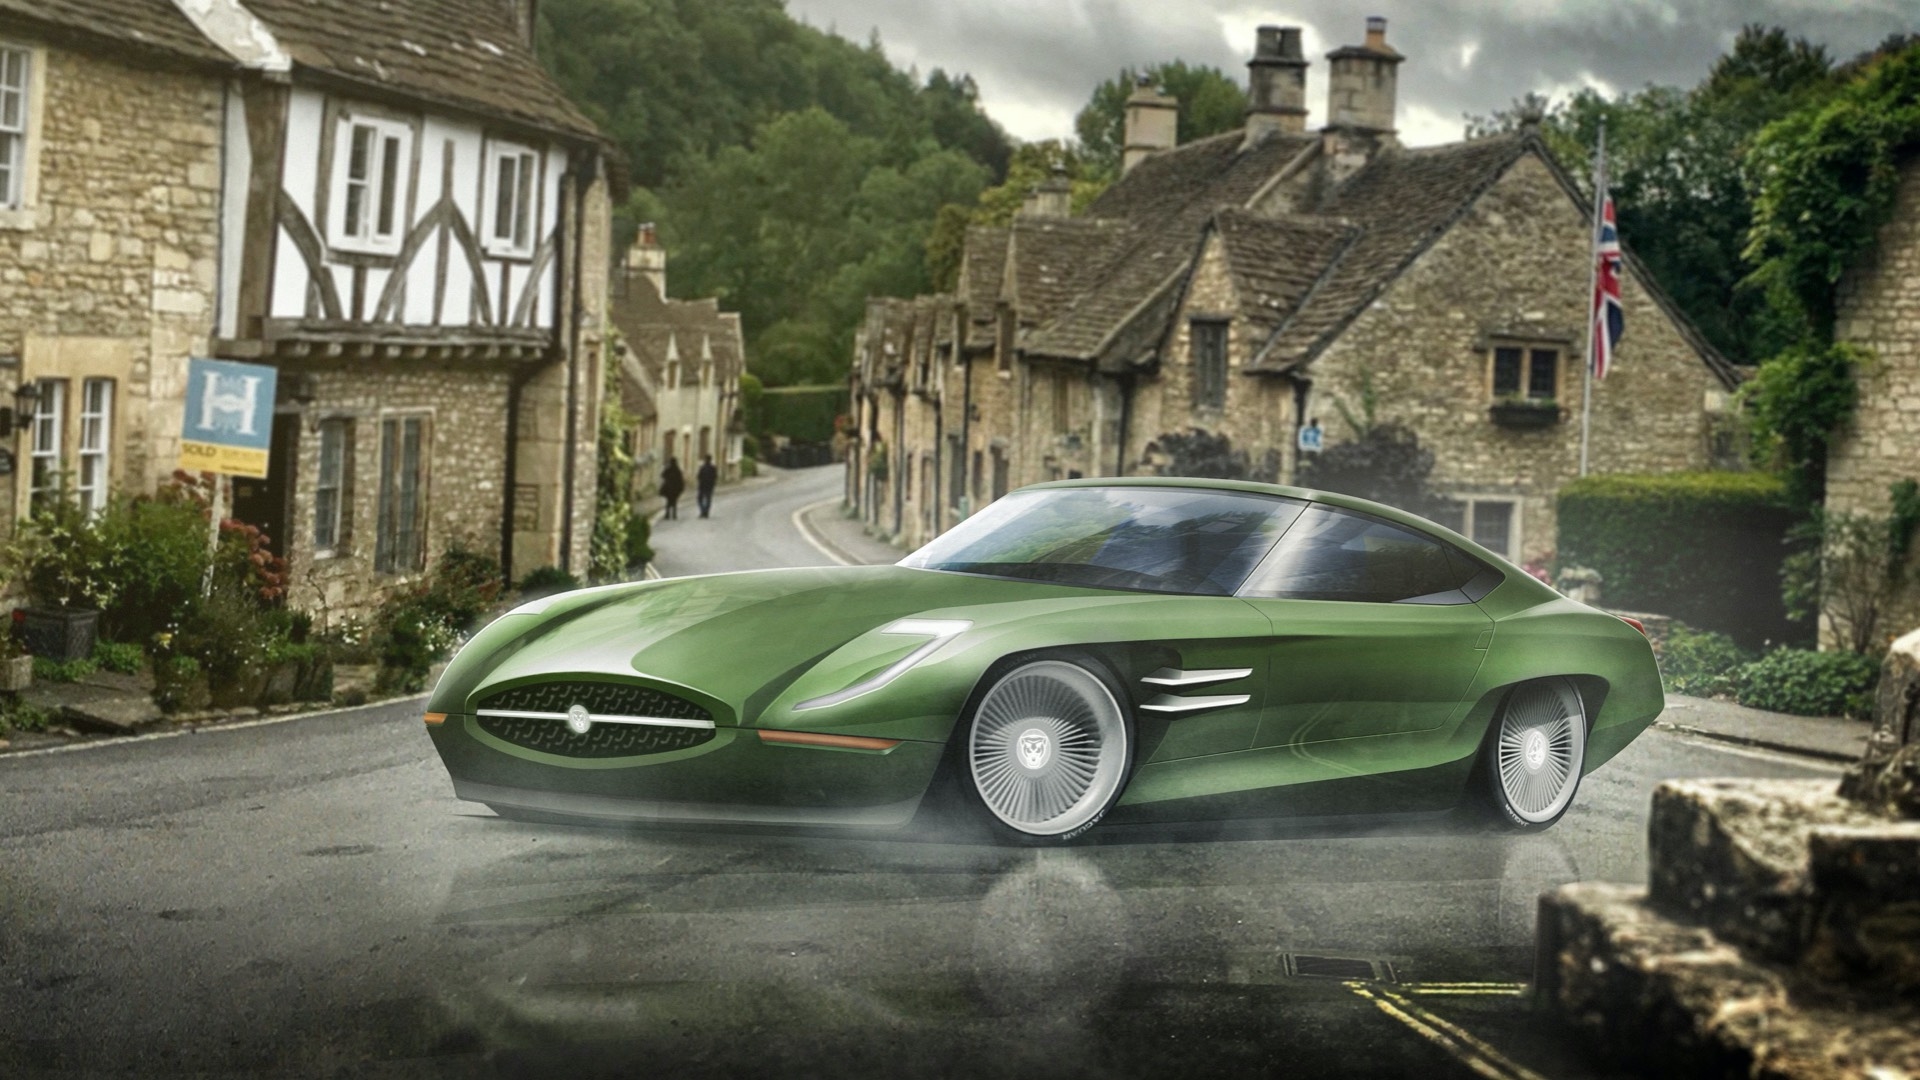 Amazing classic cars reimagined for the ‘electric era’